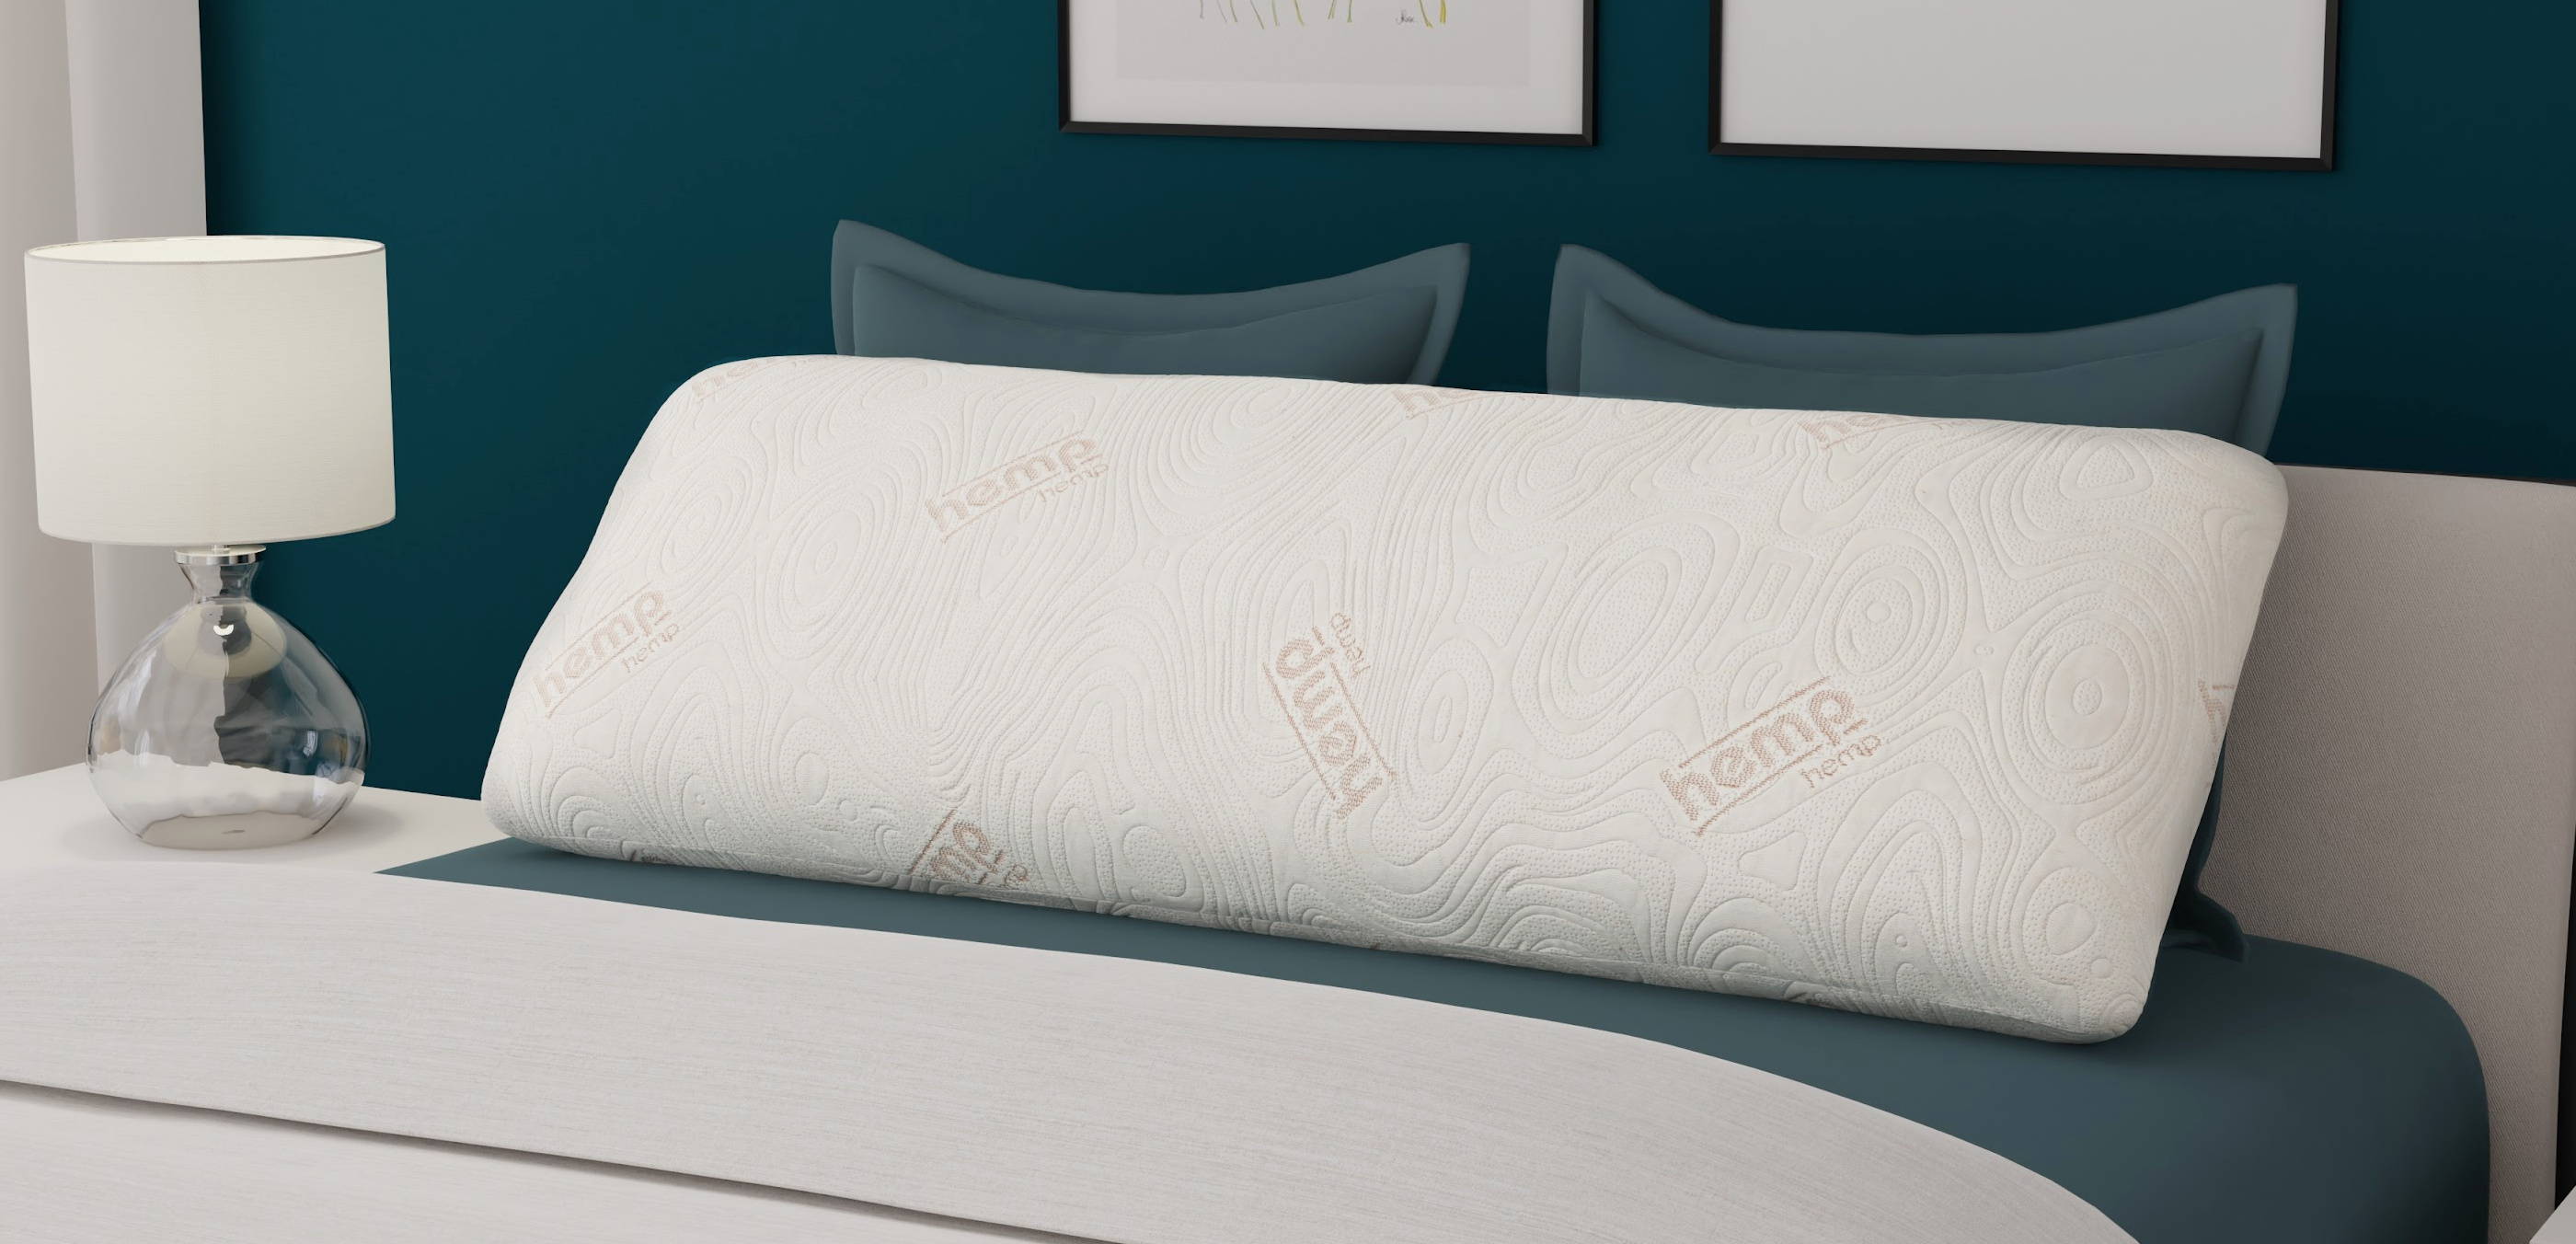 ZenCloud Memory Foam Body pillow with CBD and copper infusion laying down across the bed in a bedroom.